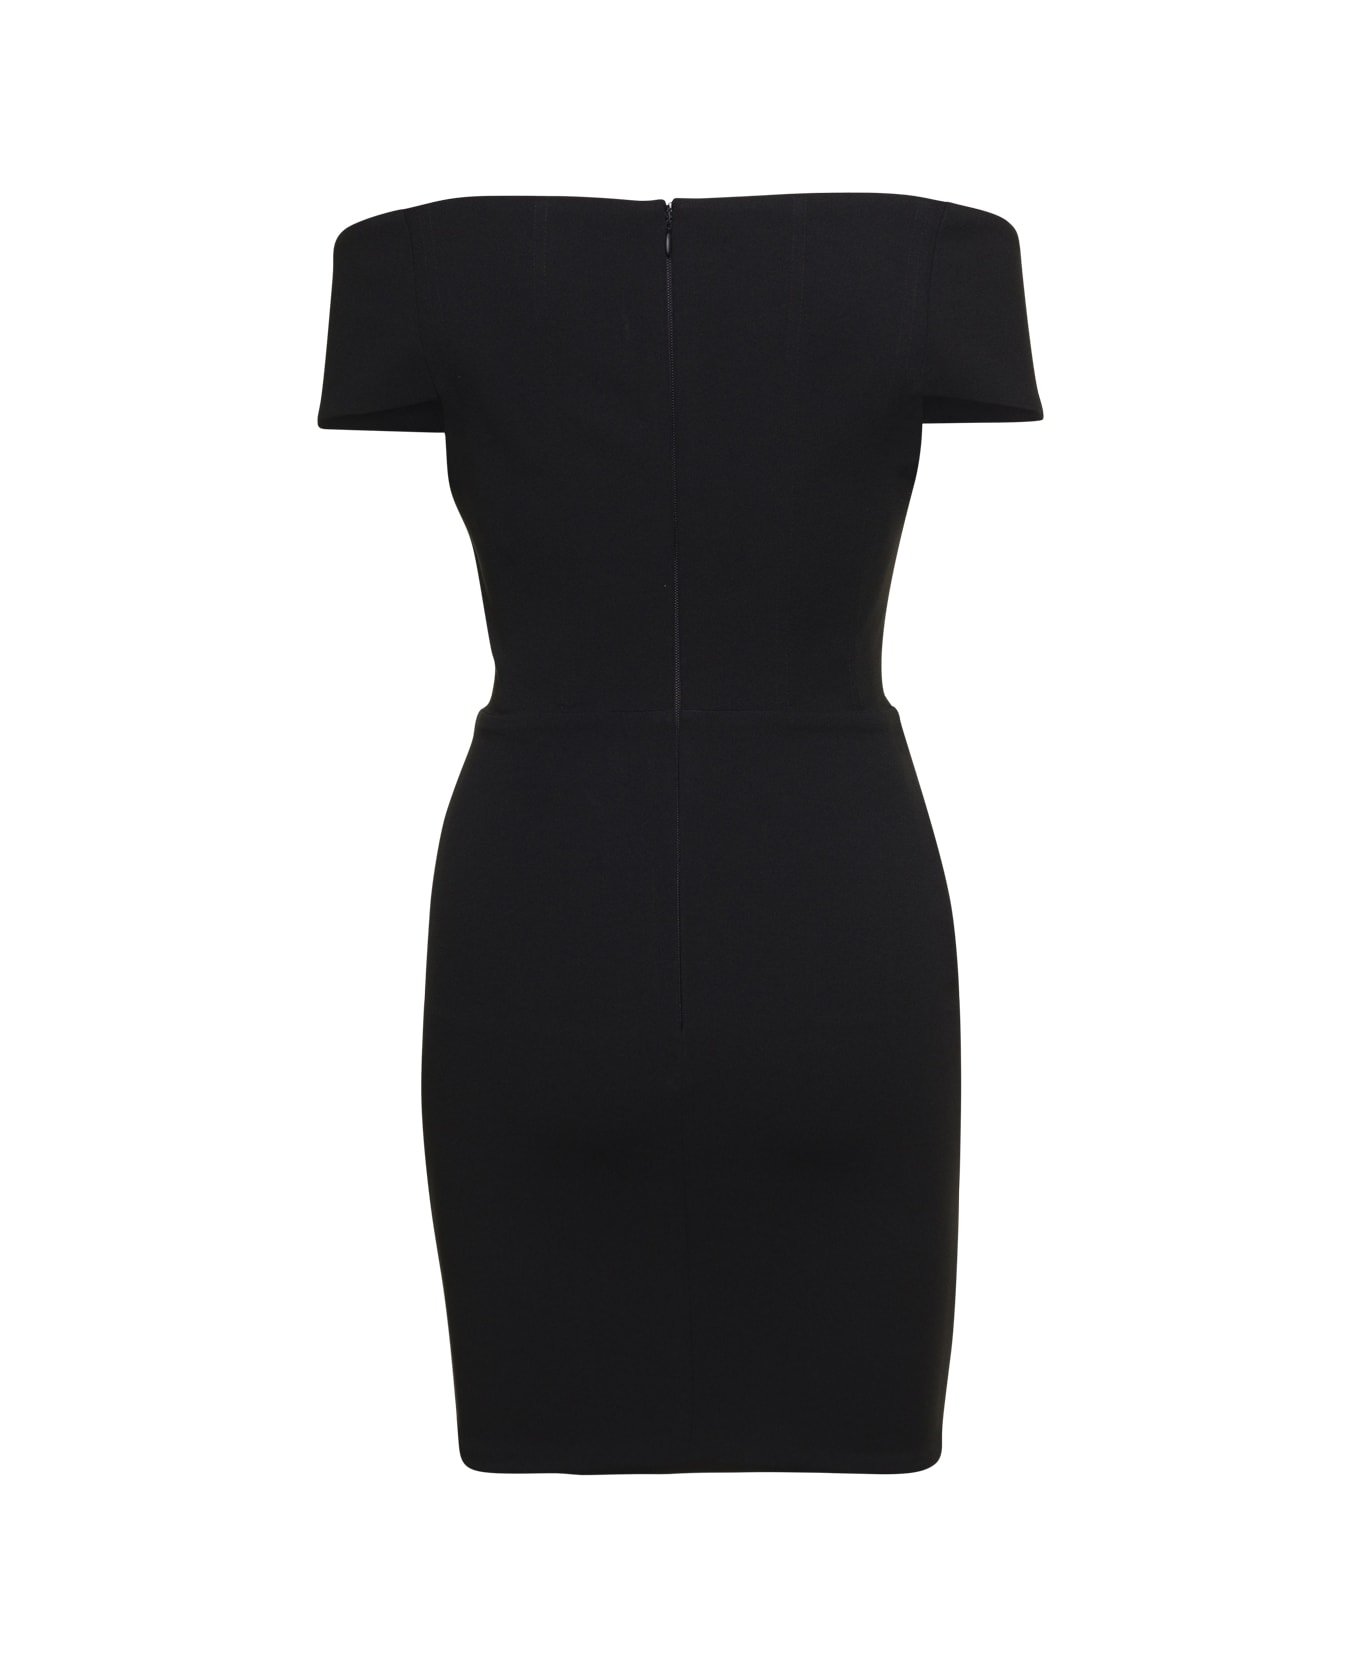 Solace London 'lola' Mini Black Dress With Plunging Sweetheart Neckline In Stretch Crepe Woman Solace London - Black